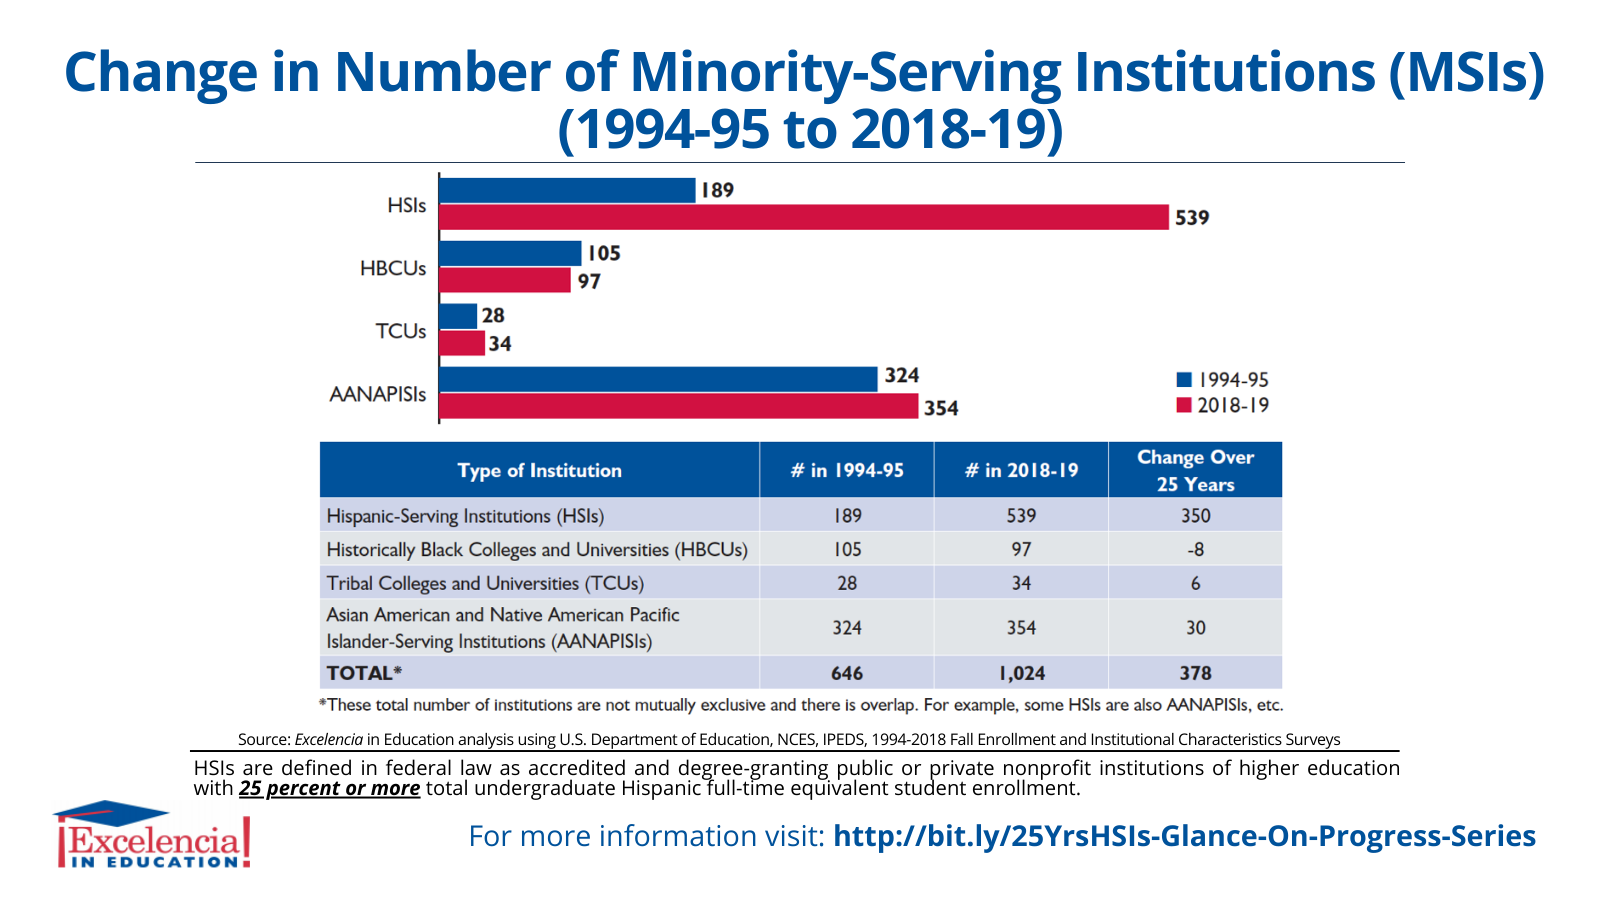 Infographic-Change in Number of Minority-Serving Institutions (MSIs) 1994-95 to 2018-19